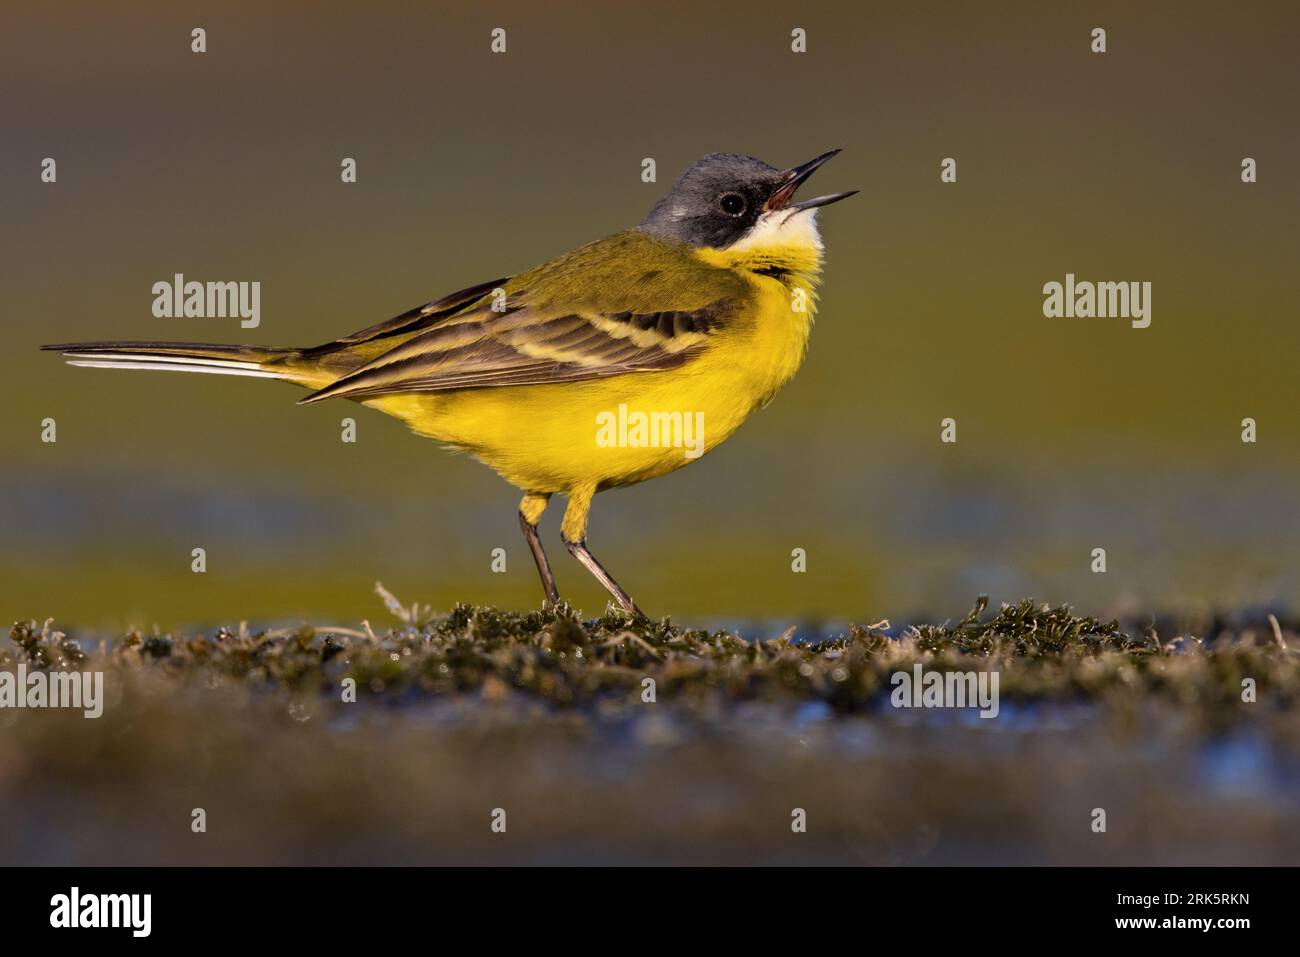 Adult male Ashy-headed Wagtail, Motacilla flava cinereocapilla, in Italy. Singing on the ground. Stock Photo